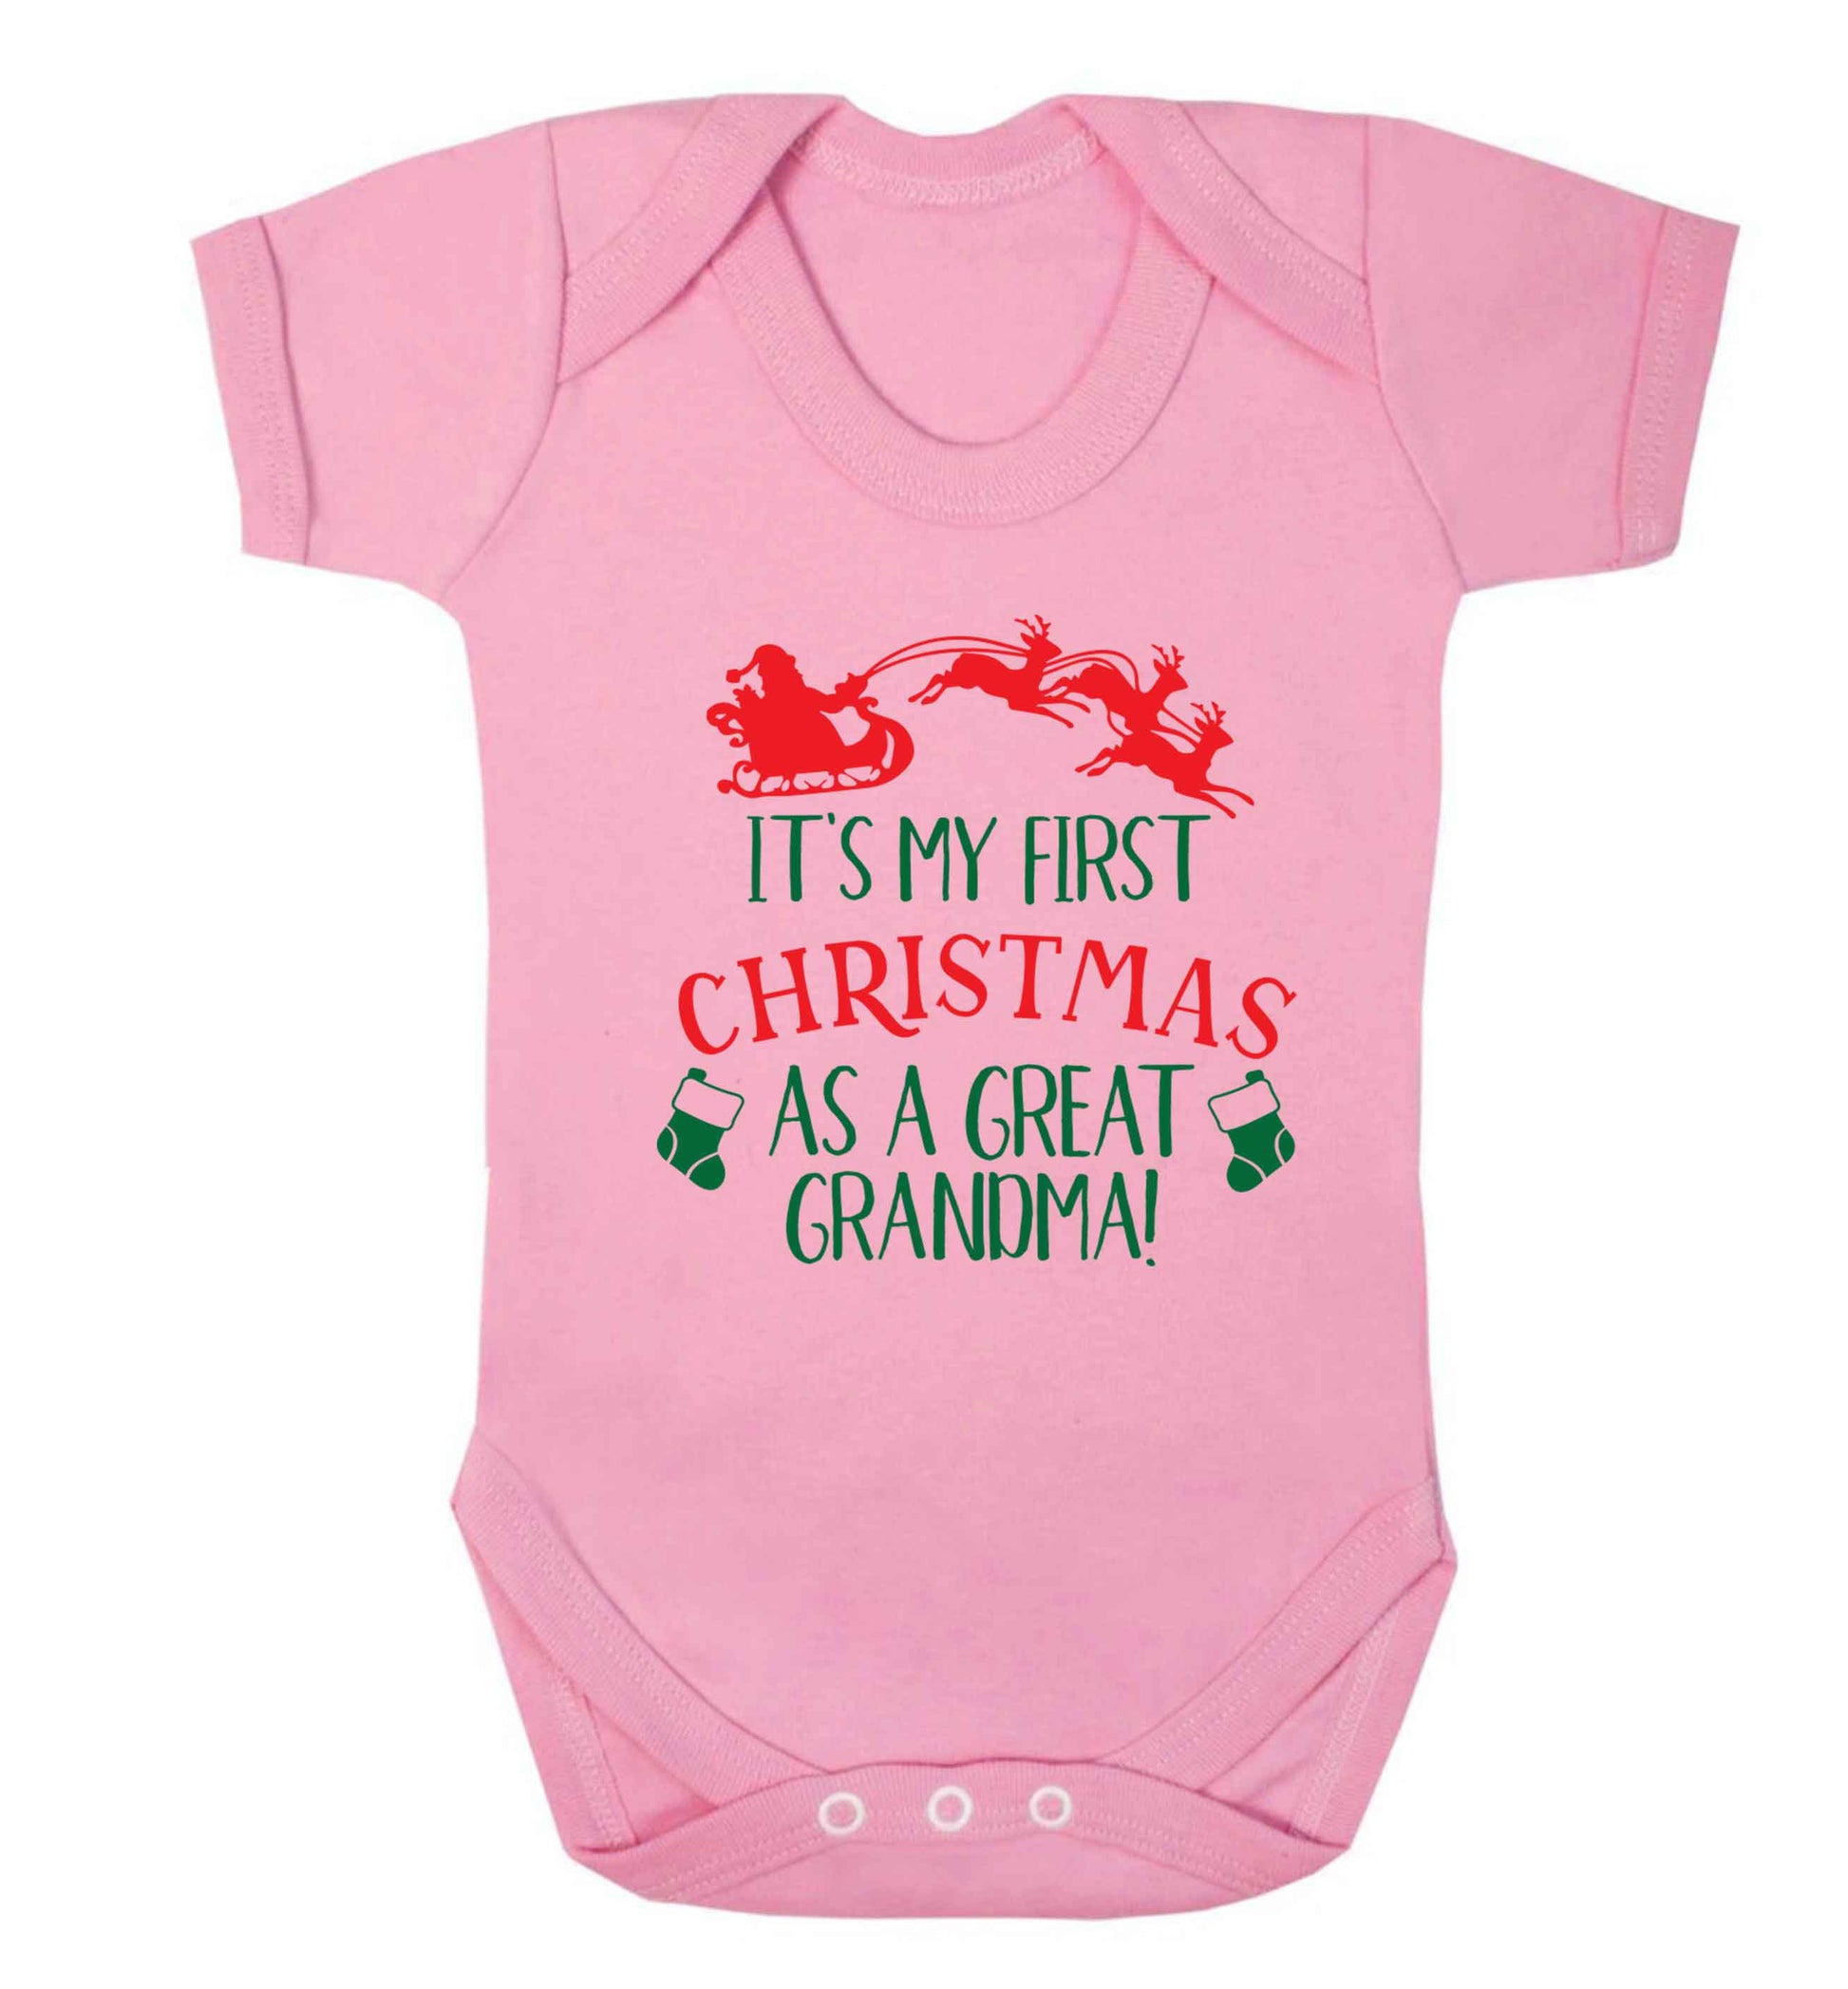 It's my first Christmas as a great grandma! Baby Vest pale pink 18-24 months